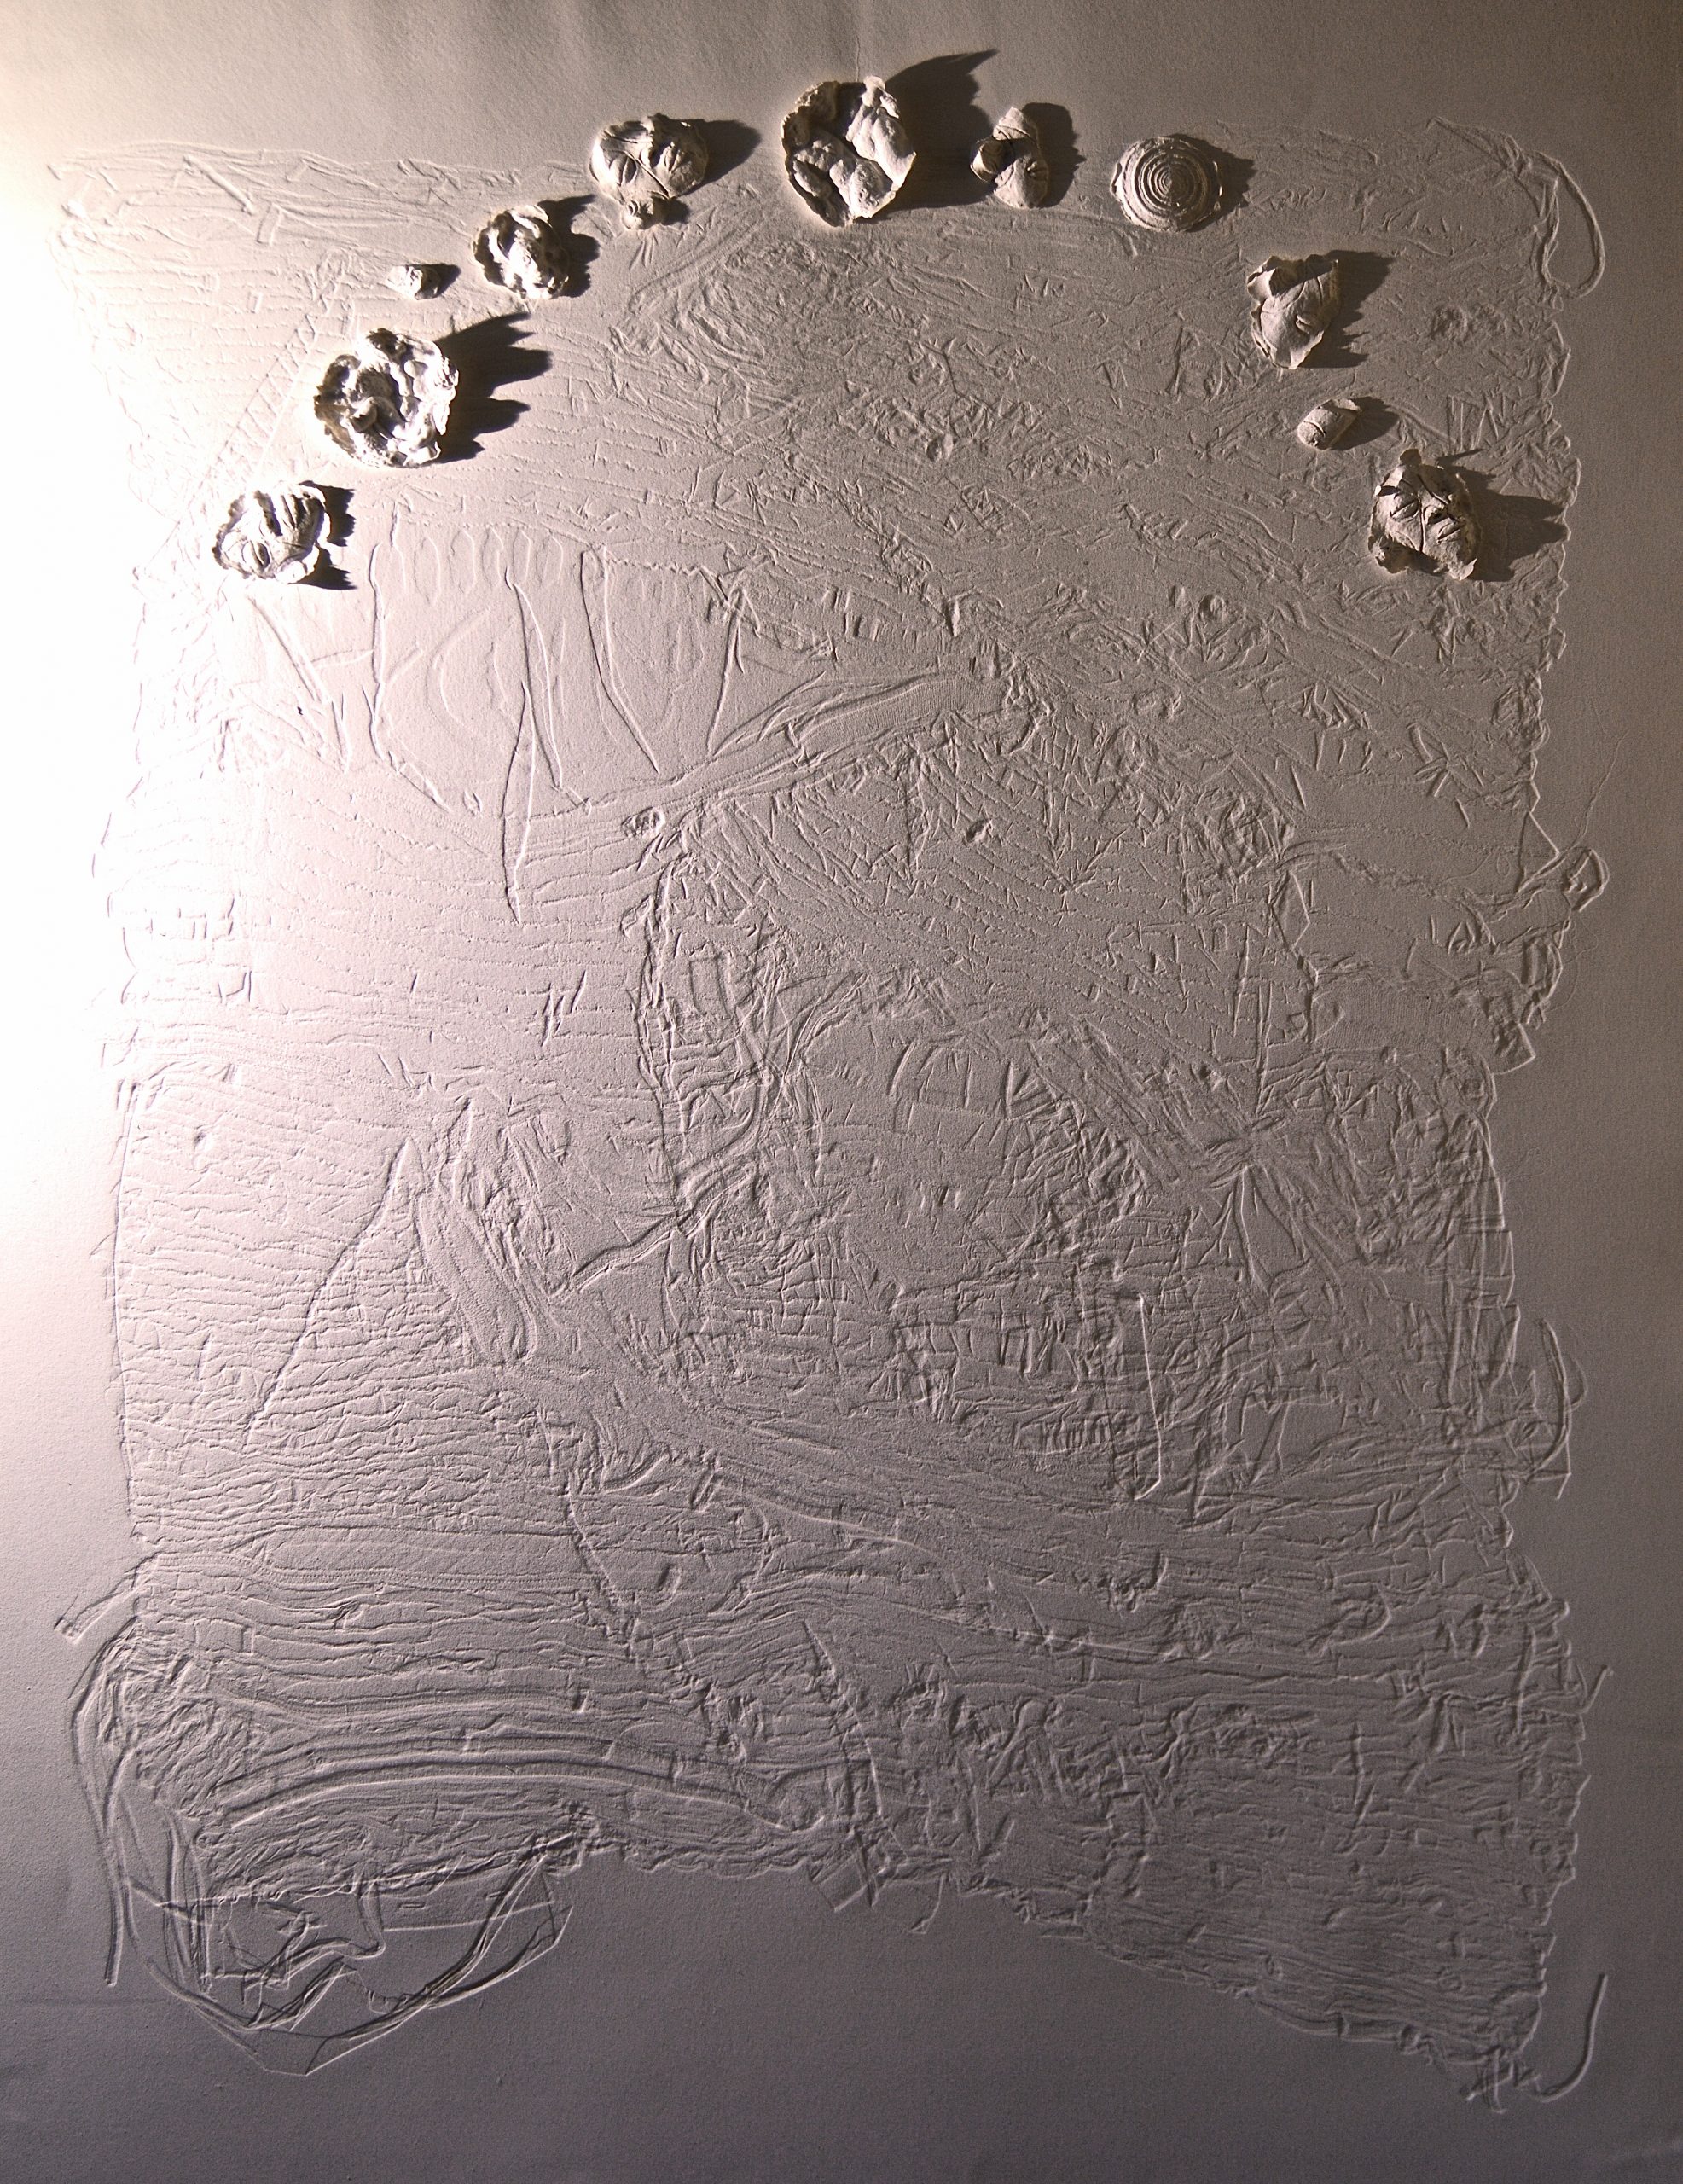 Land Memory I
110cm x 160cm
Embossing and paper sculptures